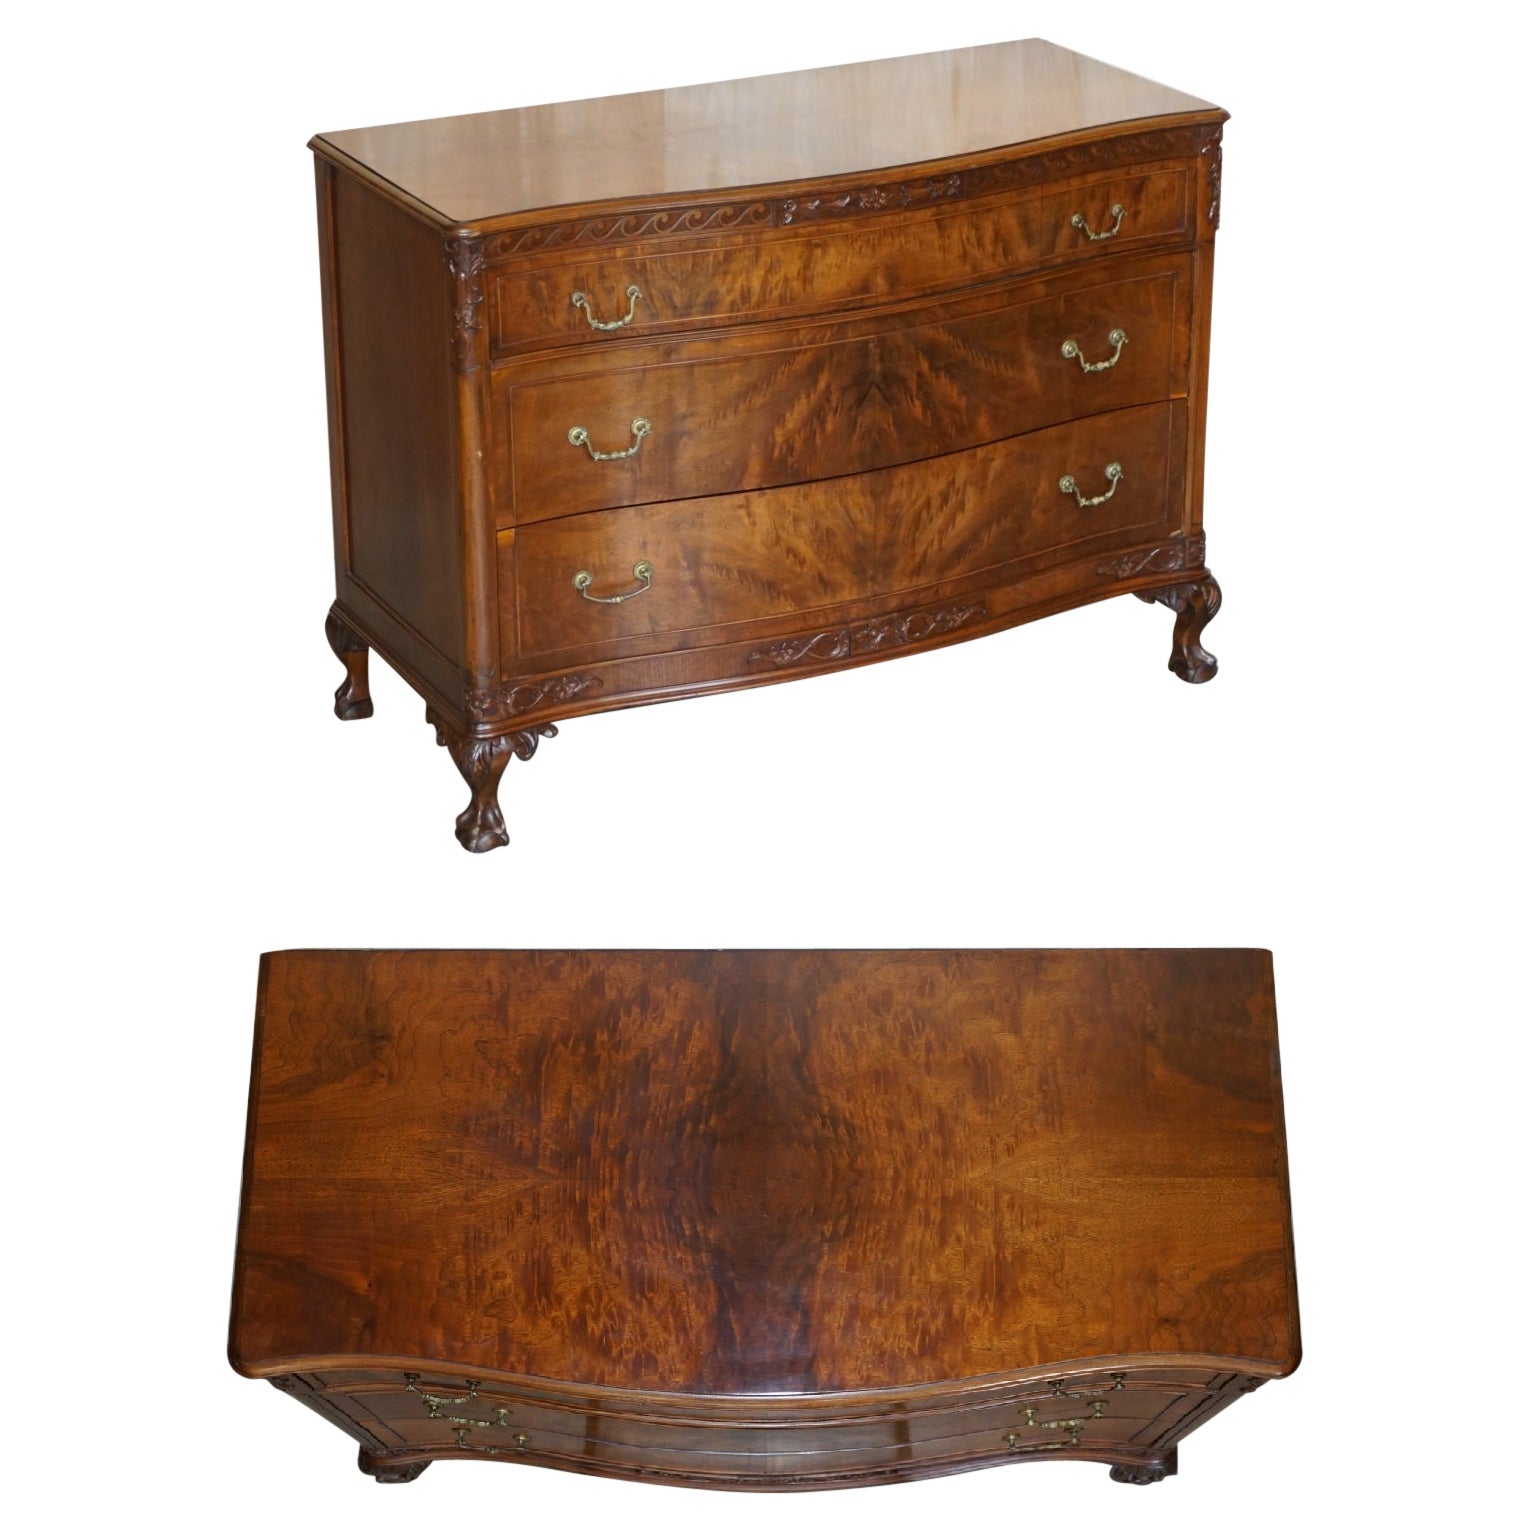 Antique Serpentine Fronted Claw & Ball Feet Flamed Hardwood Chest of Drawers For Sale